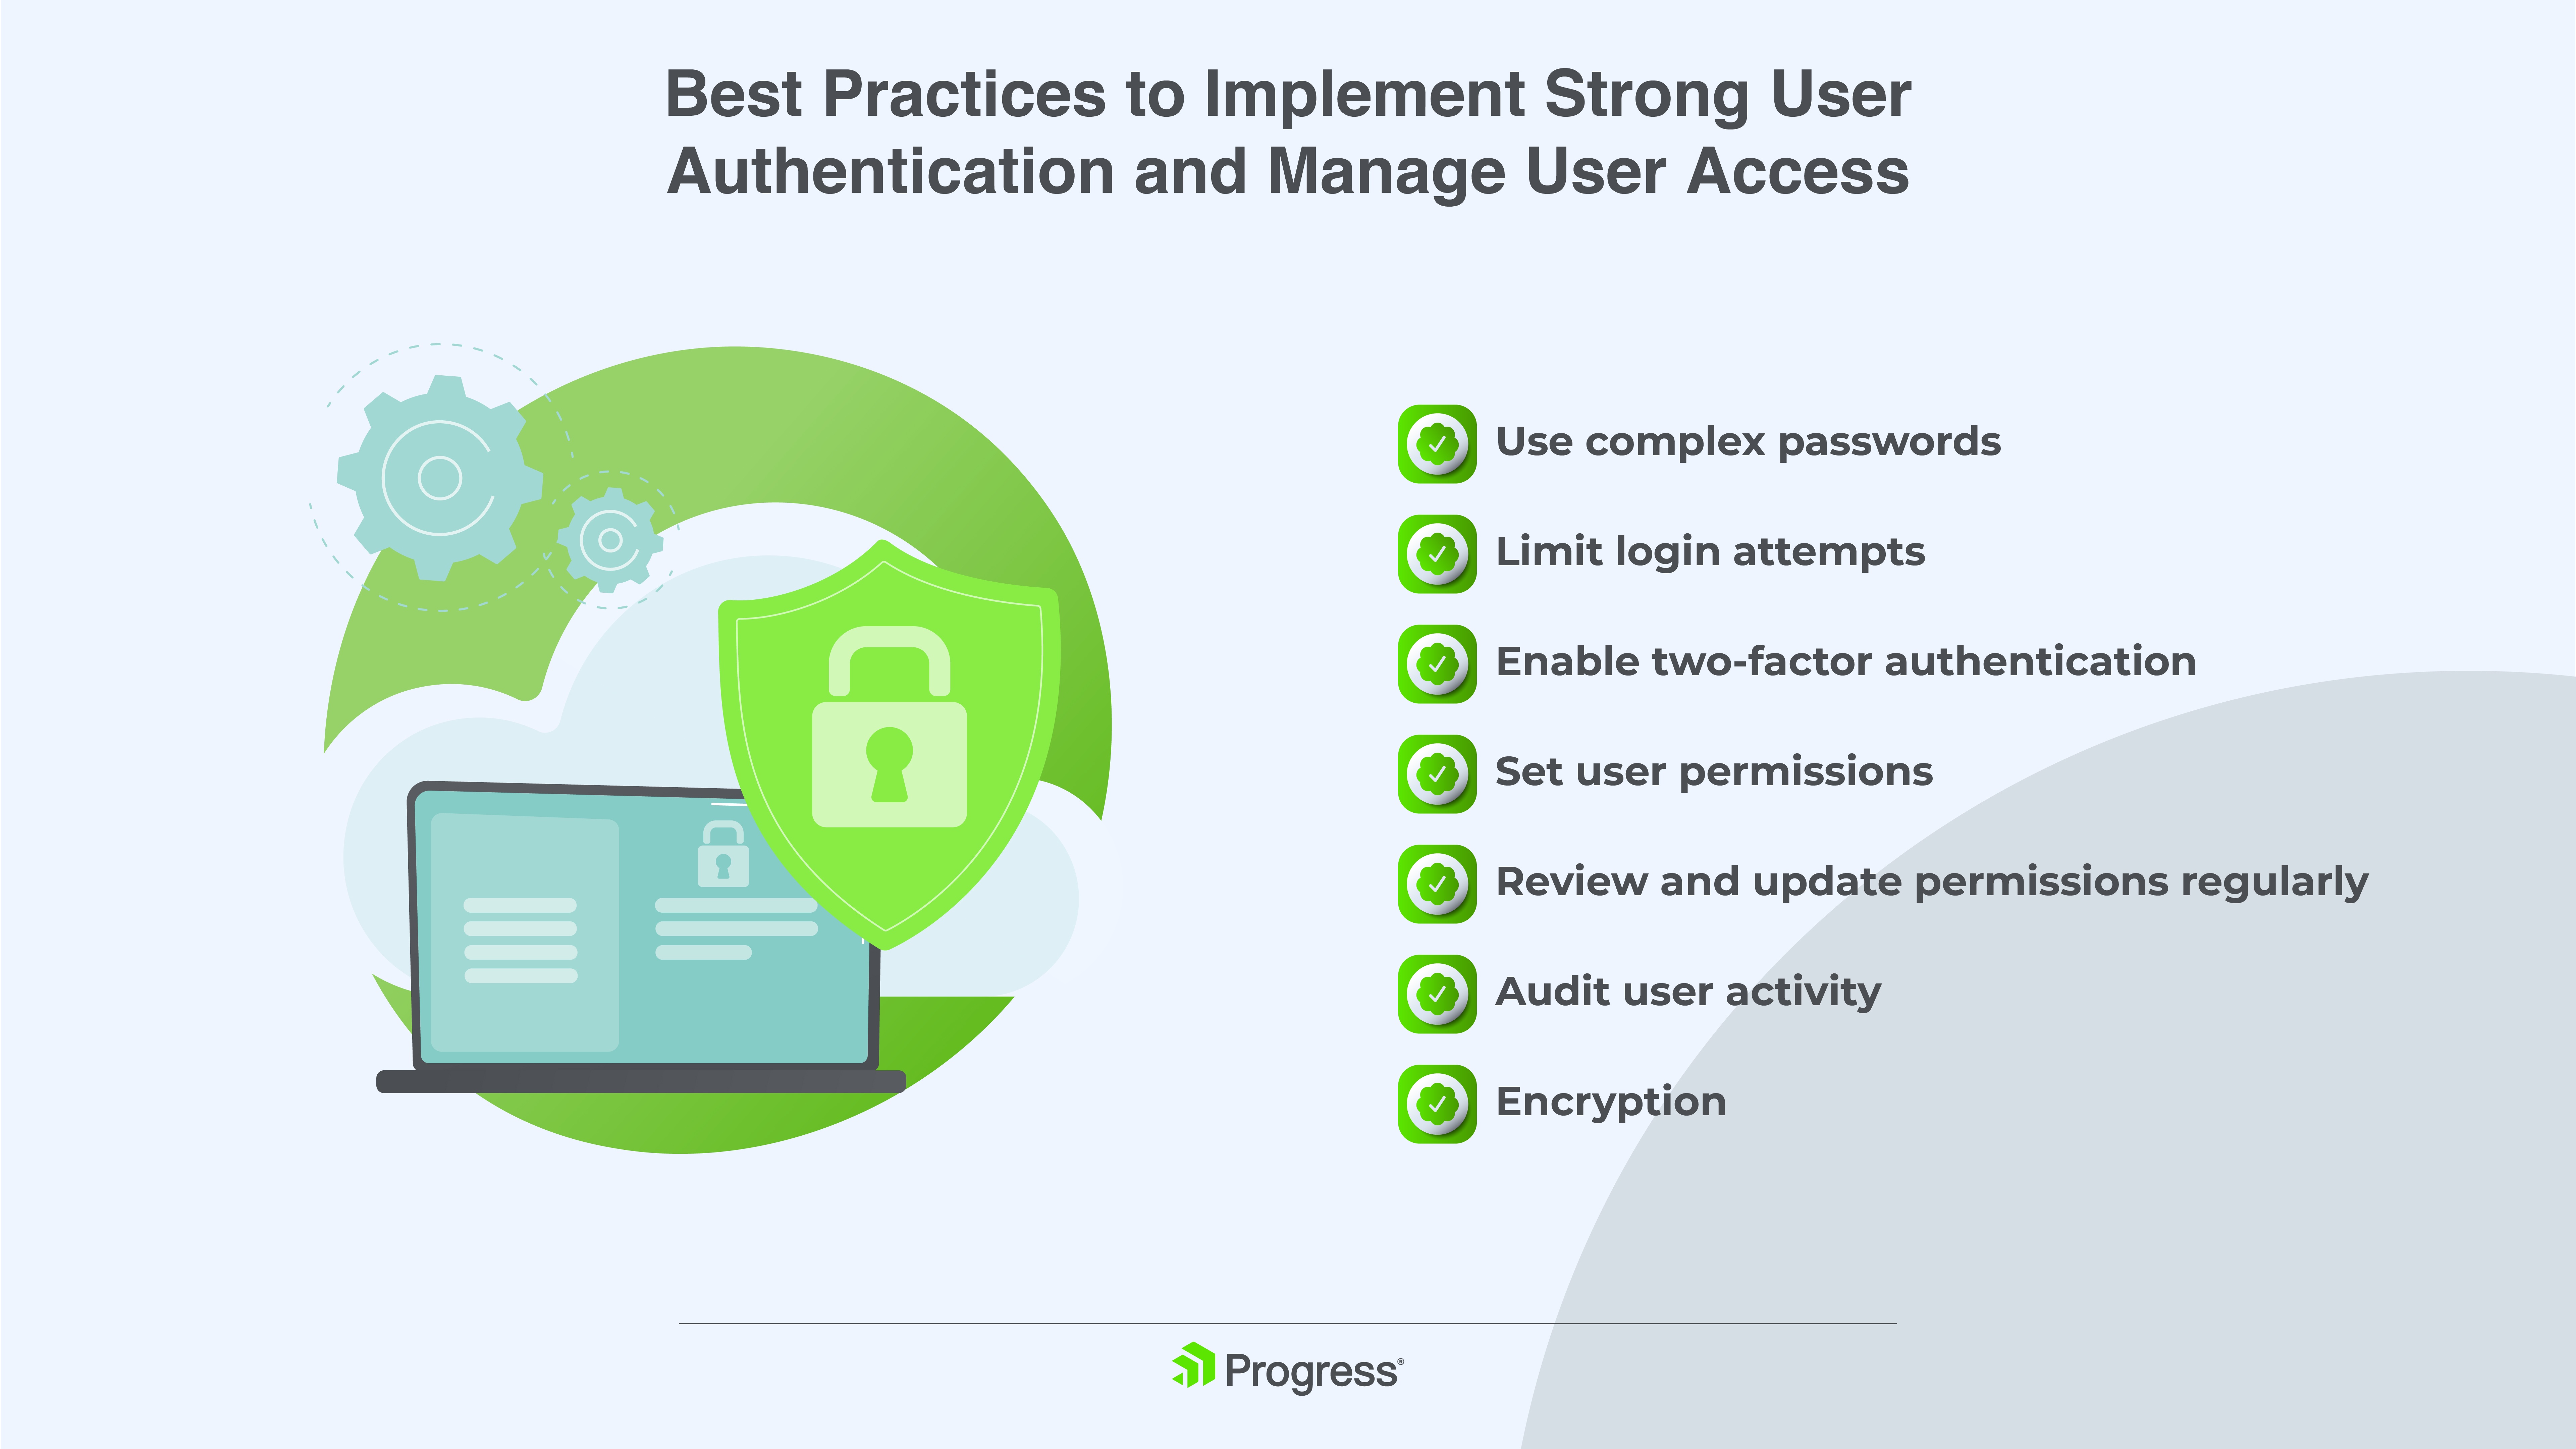 Best Practices to Implement Strong User Authentication and Manage User Access